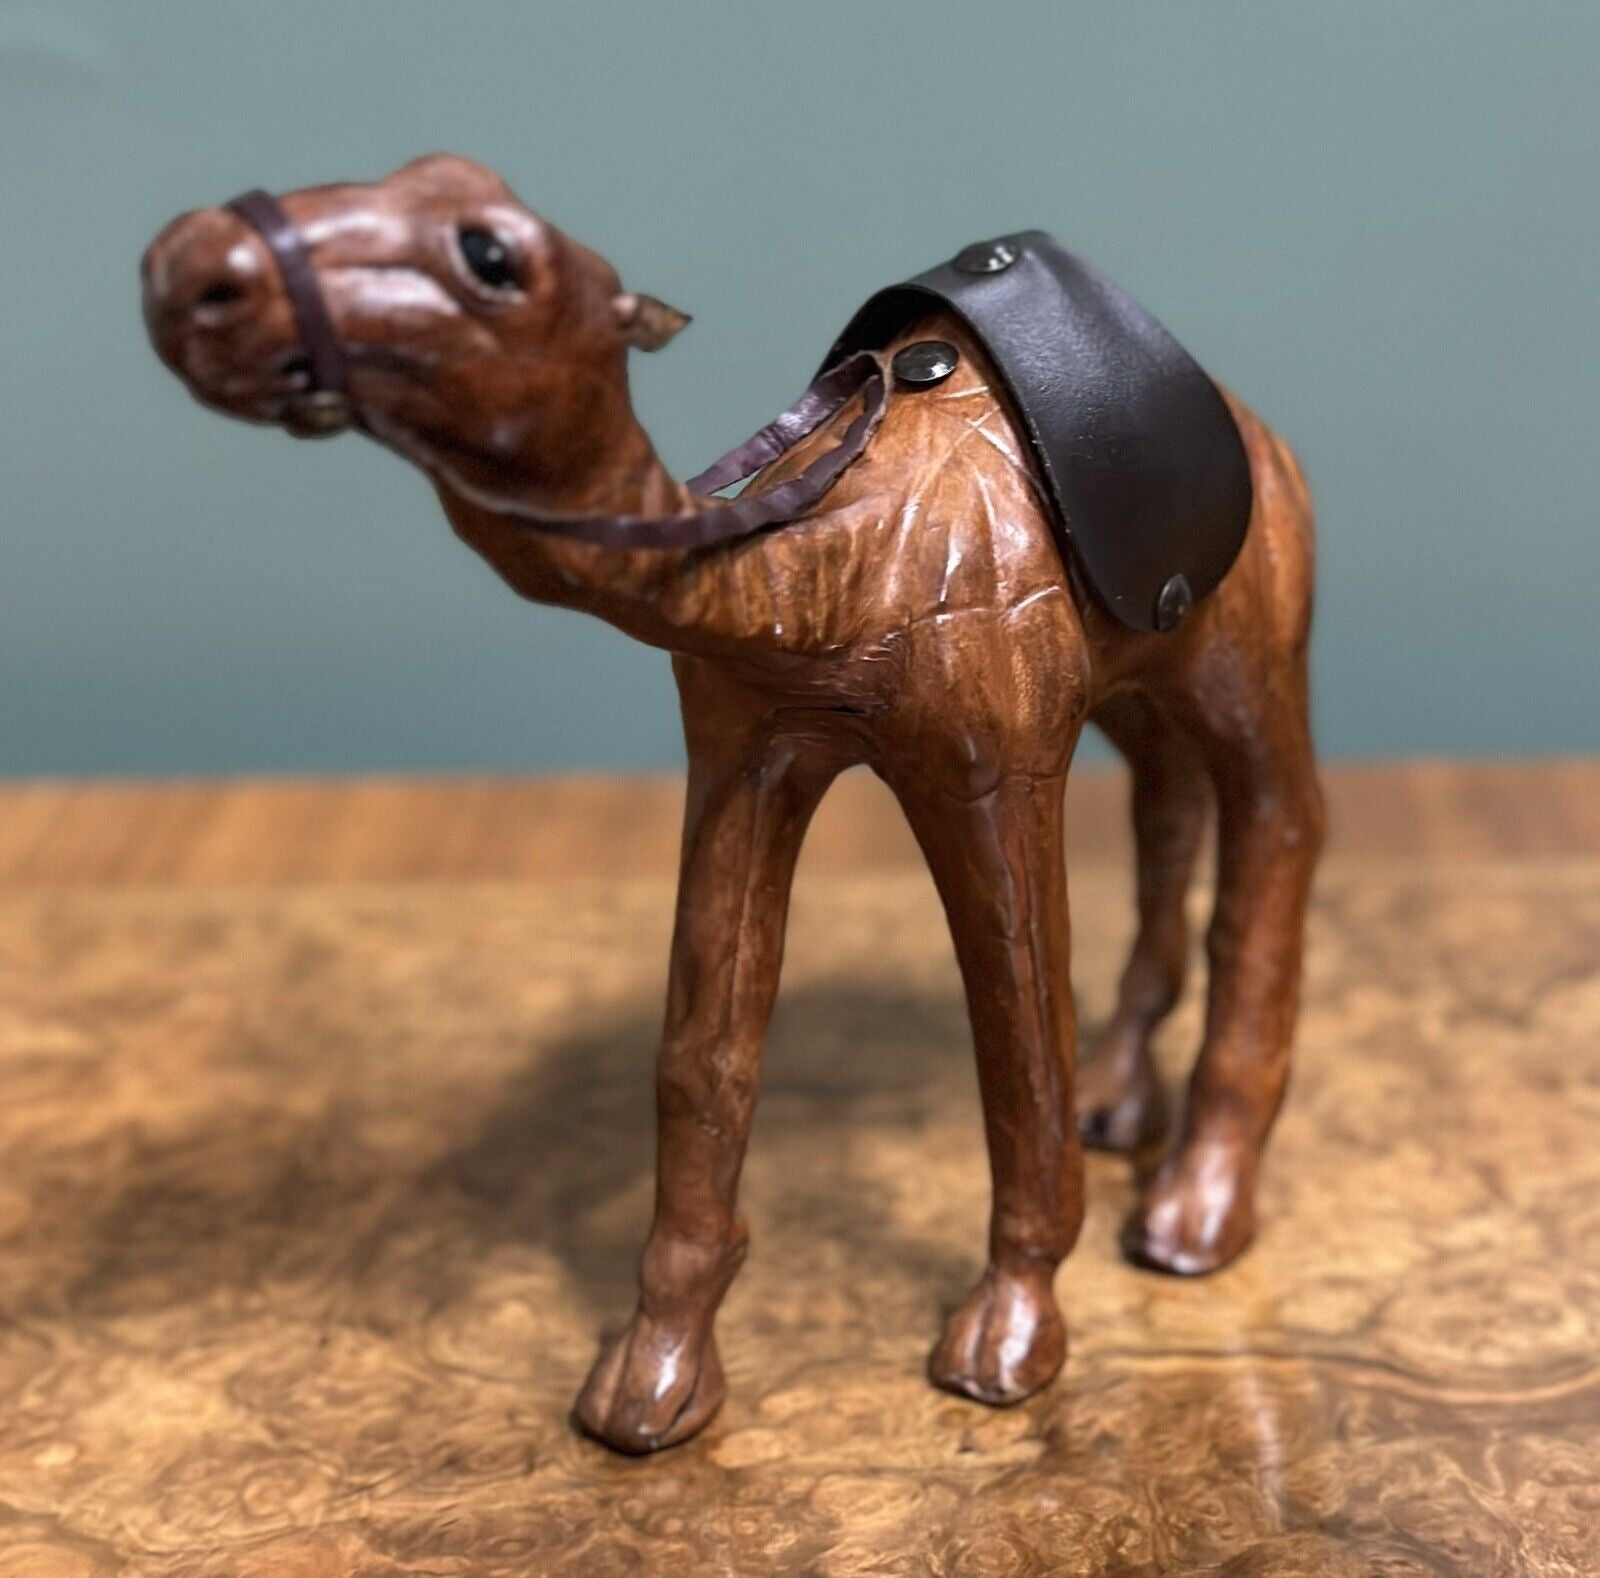 CAMEL SCULPTURE WITH LOVELY AGED LEATHER ON HAND CARVED WOOD BY LIBERTYS LONDON